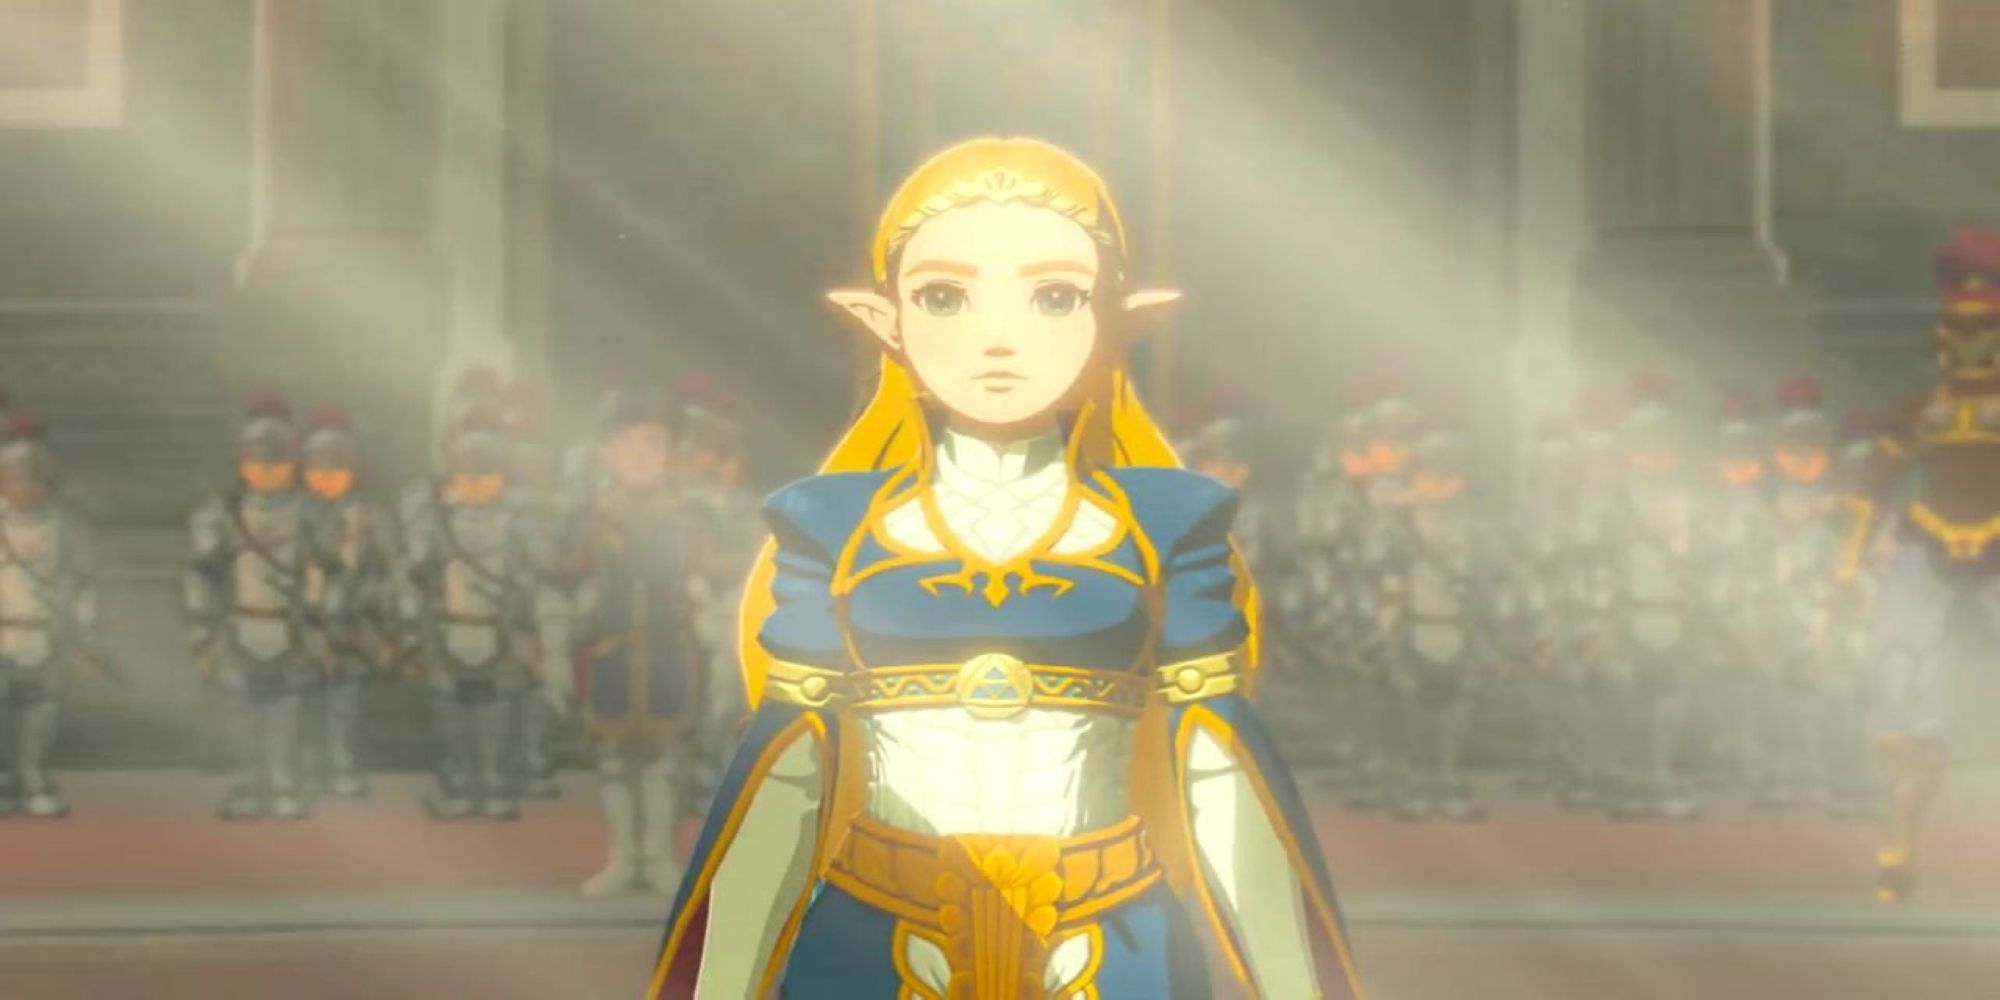 Zelda from The Legend of Zelda: Breath of the Wild stands at attention in her royal garb, with a troop of soldiers lining the wall behind her.